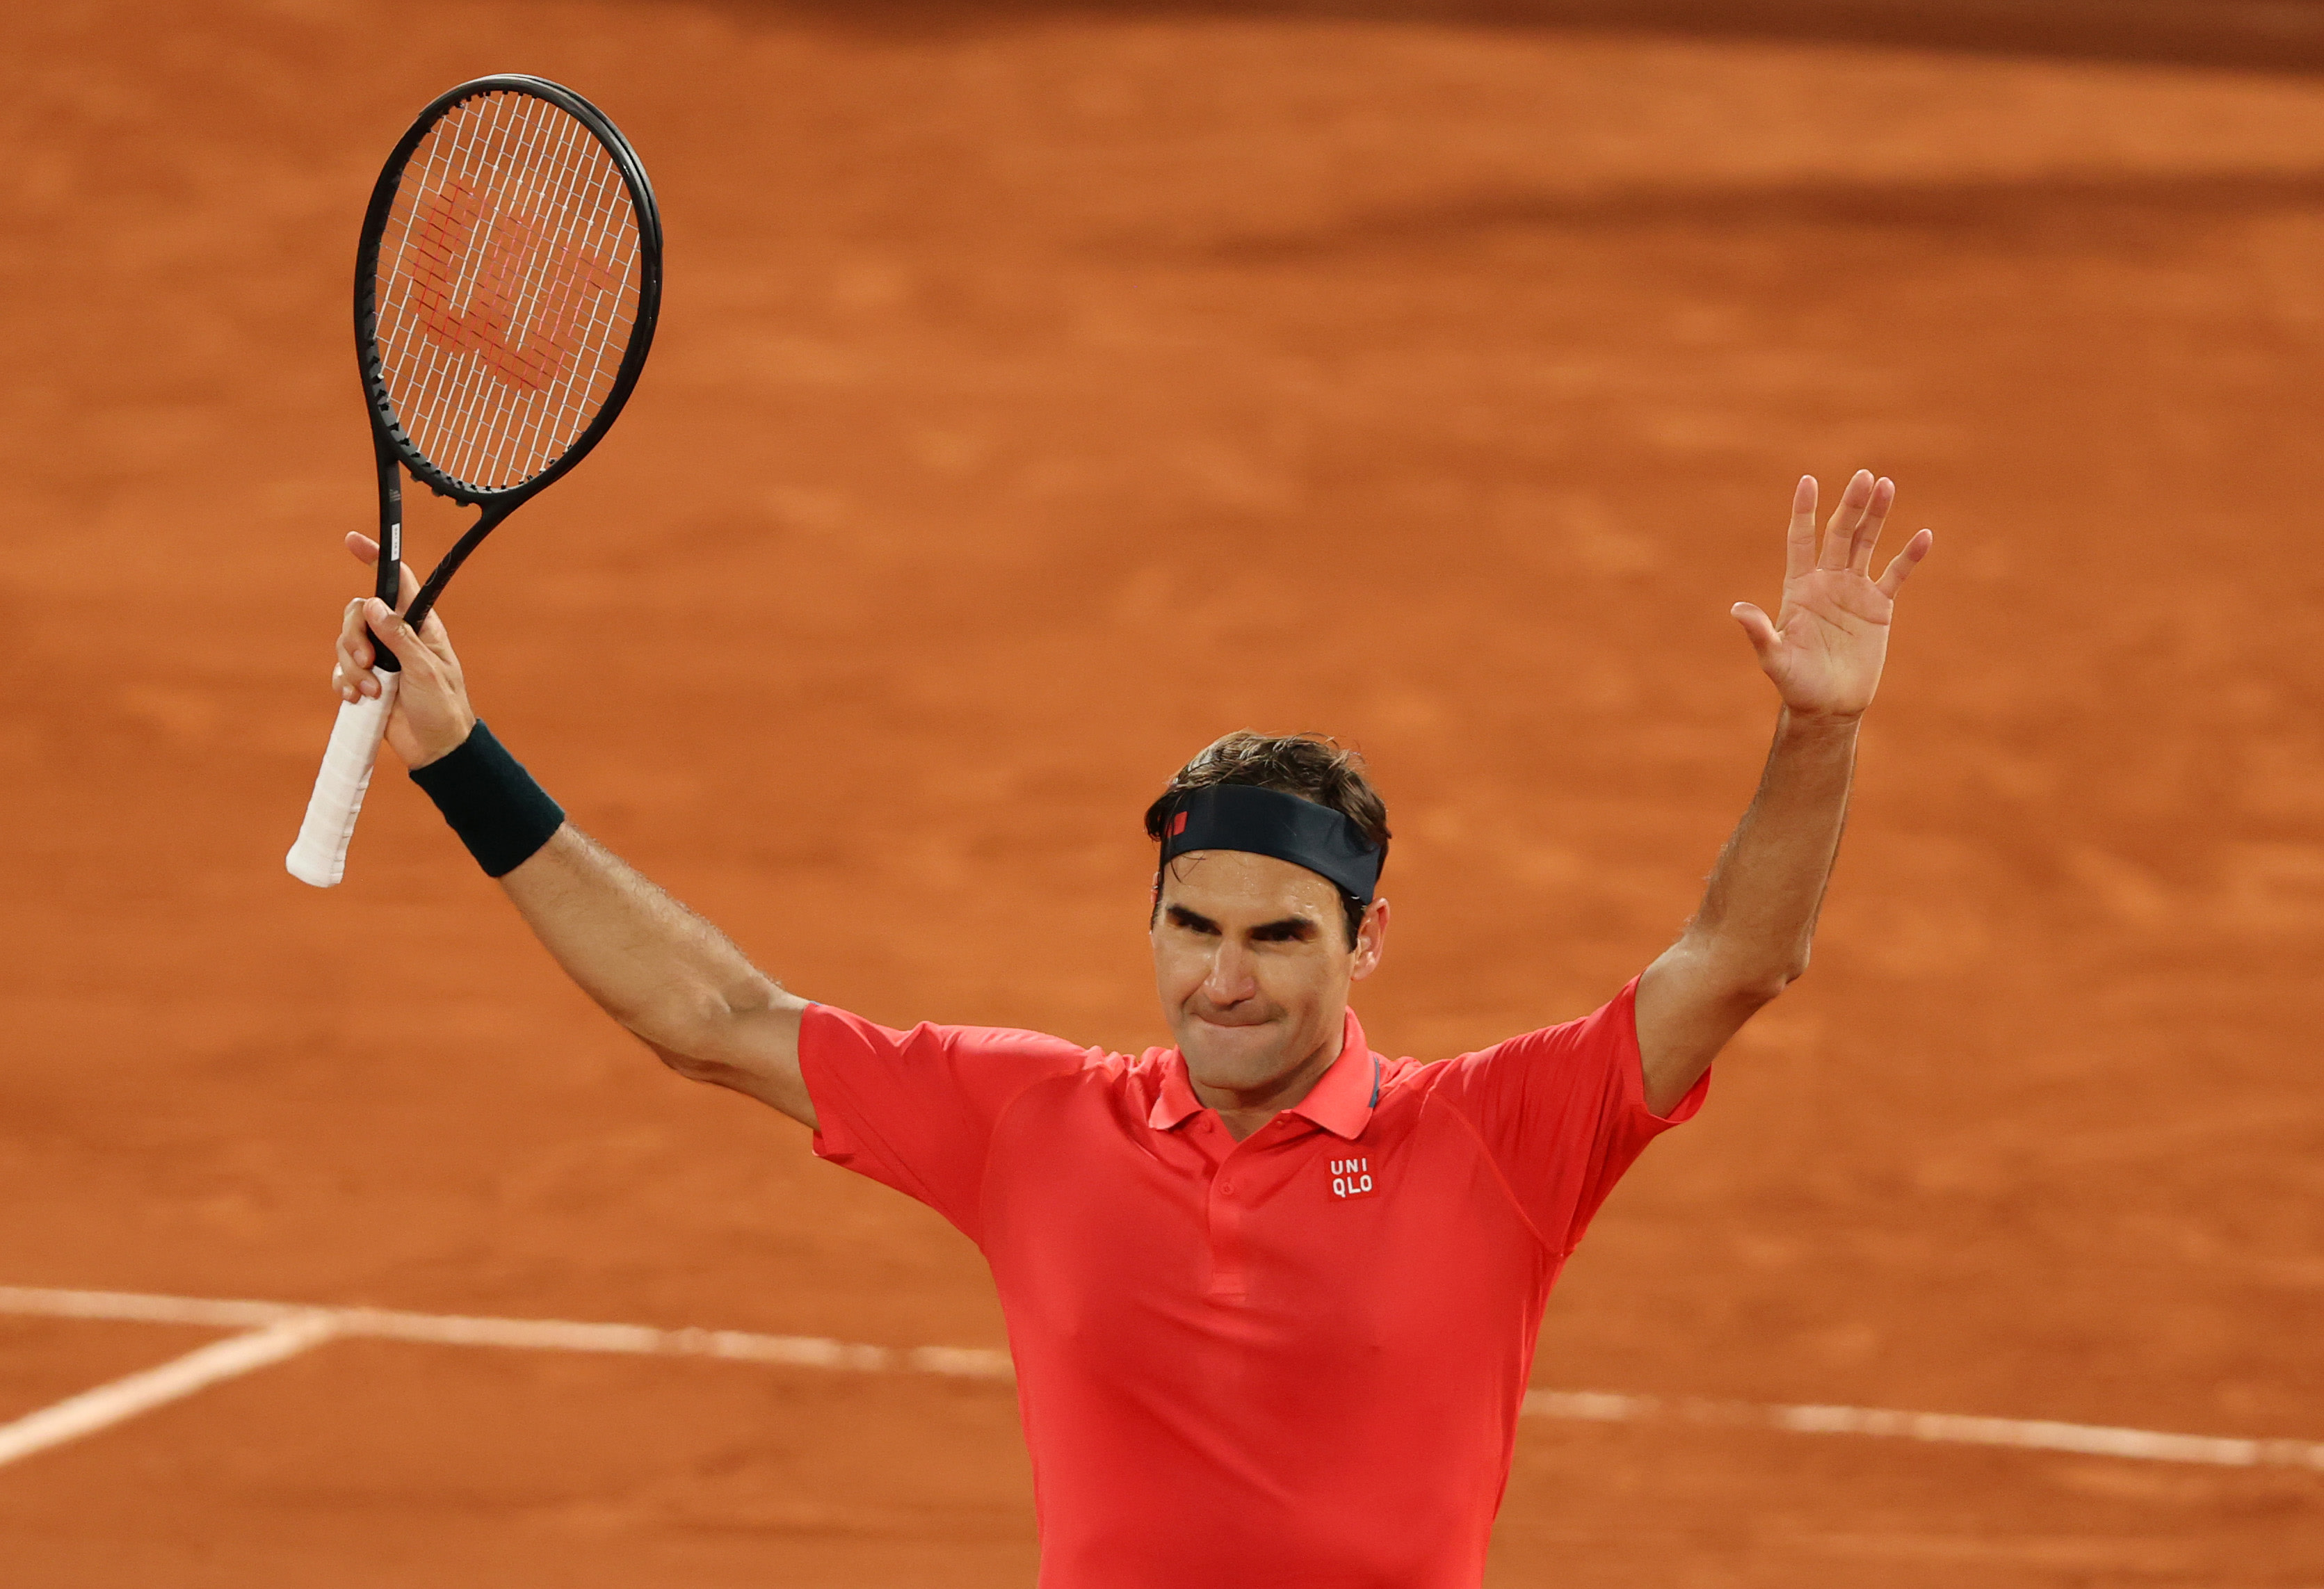 Experience carries Roger Federer to victory over Dominik Koepfer